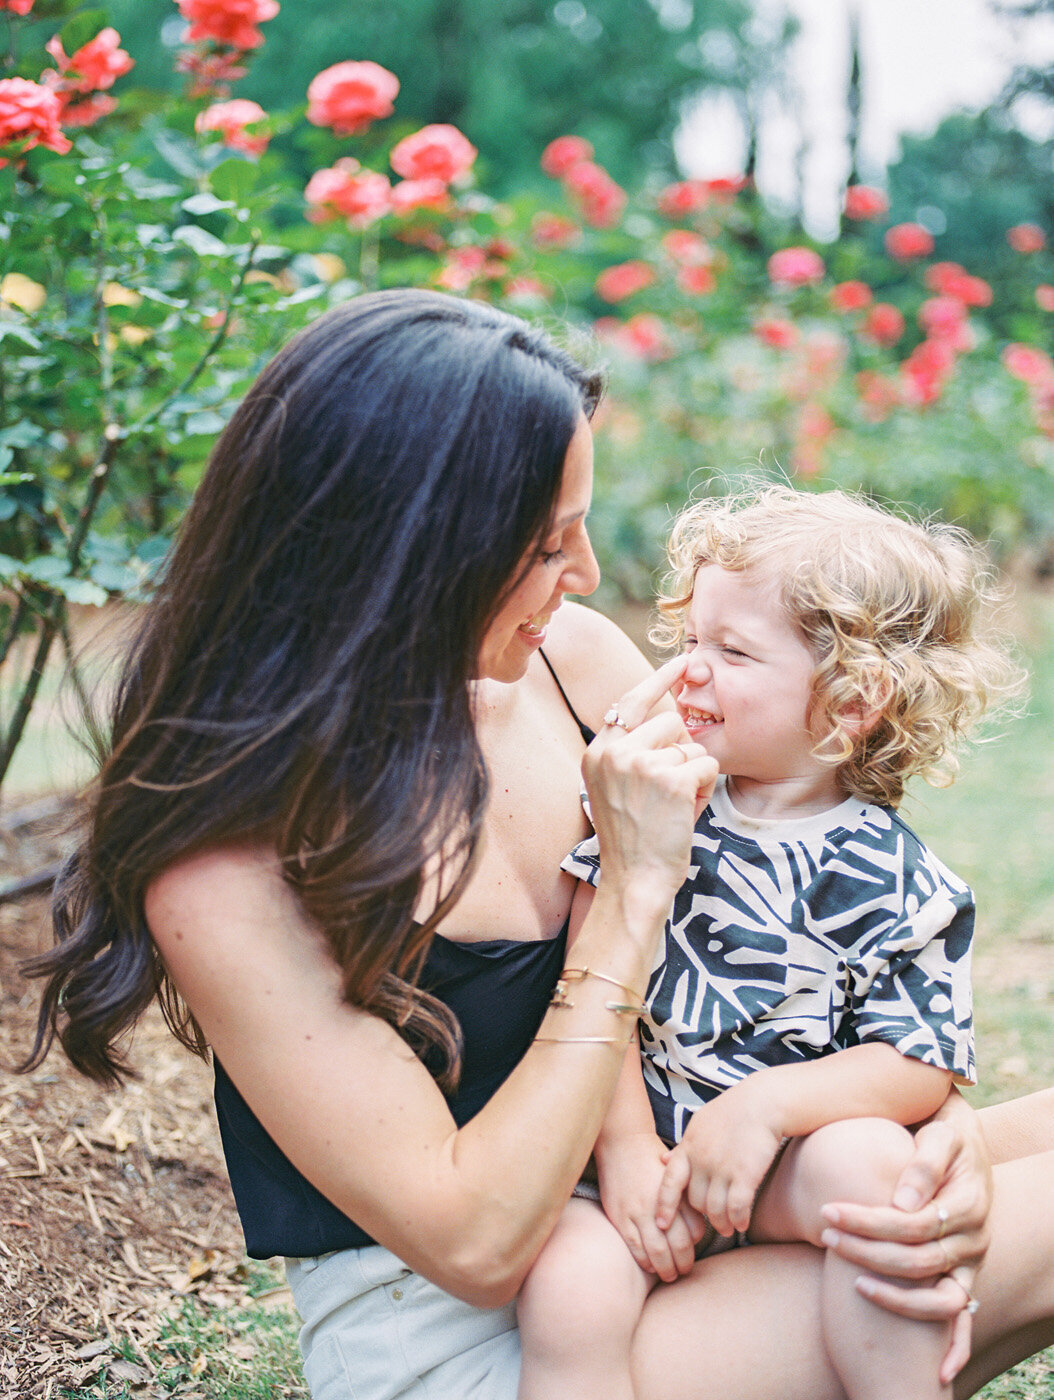 Raleigh Family Photographer | Jessica Agee Photography - 010